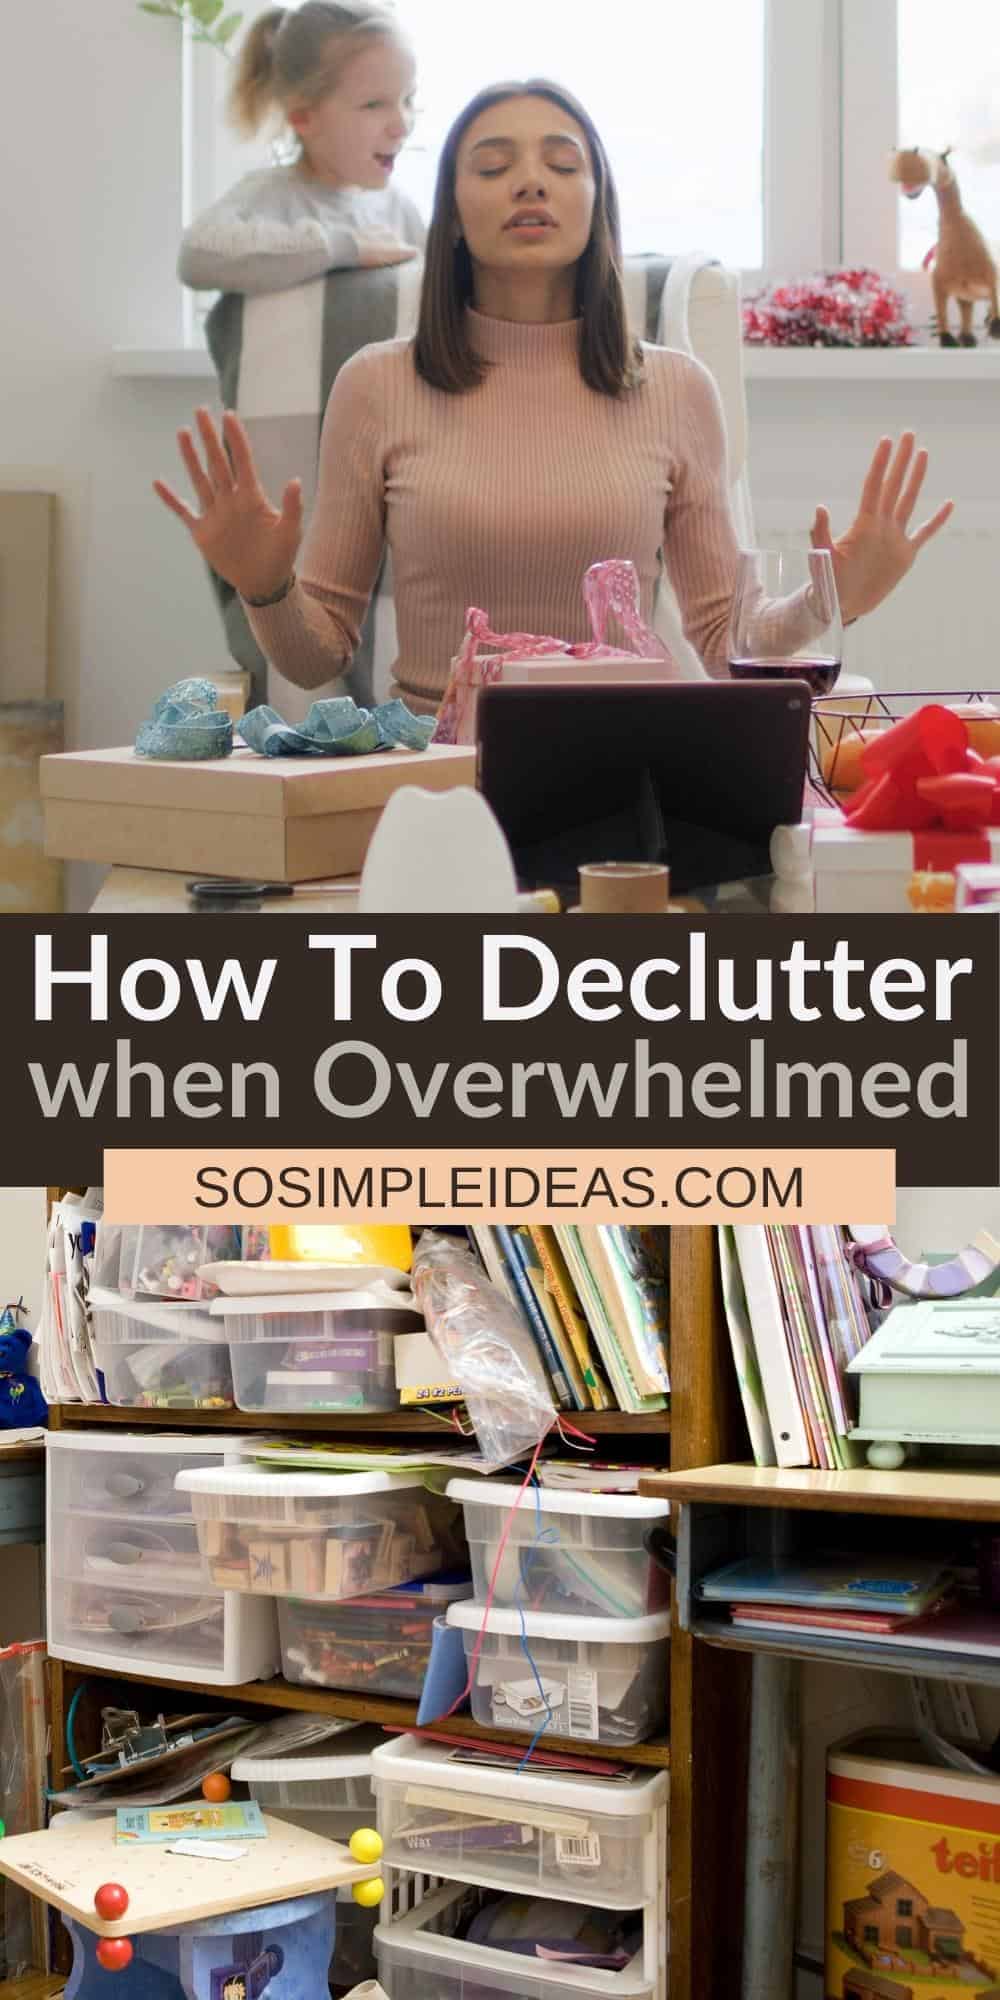 how to declutter when overwhelmed pinterest image.